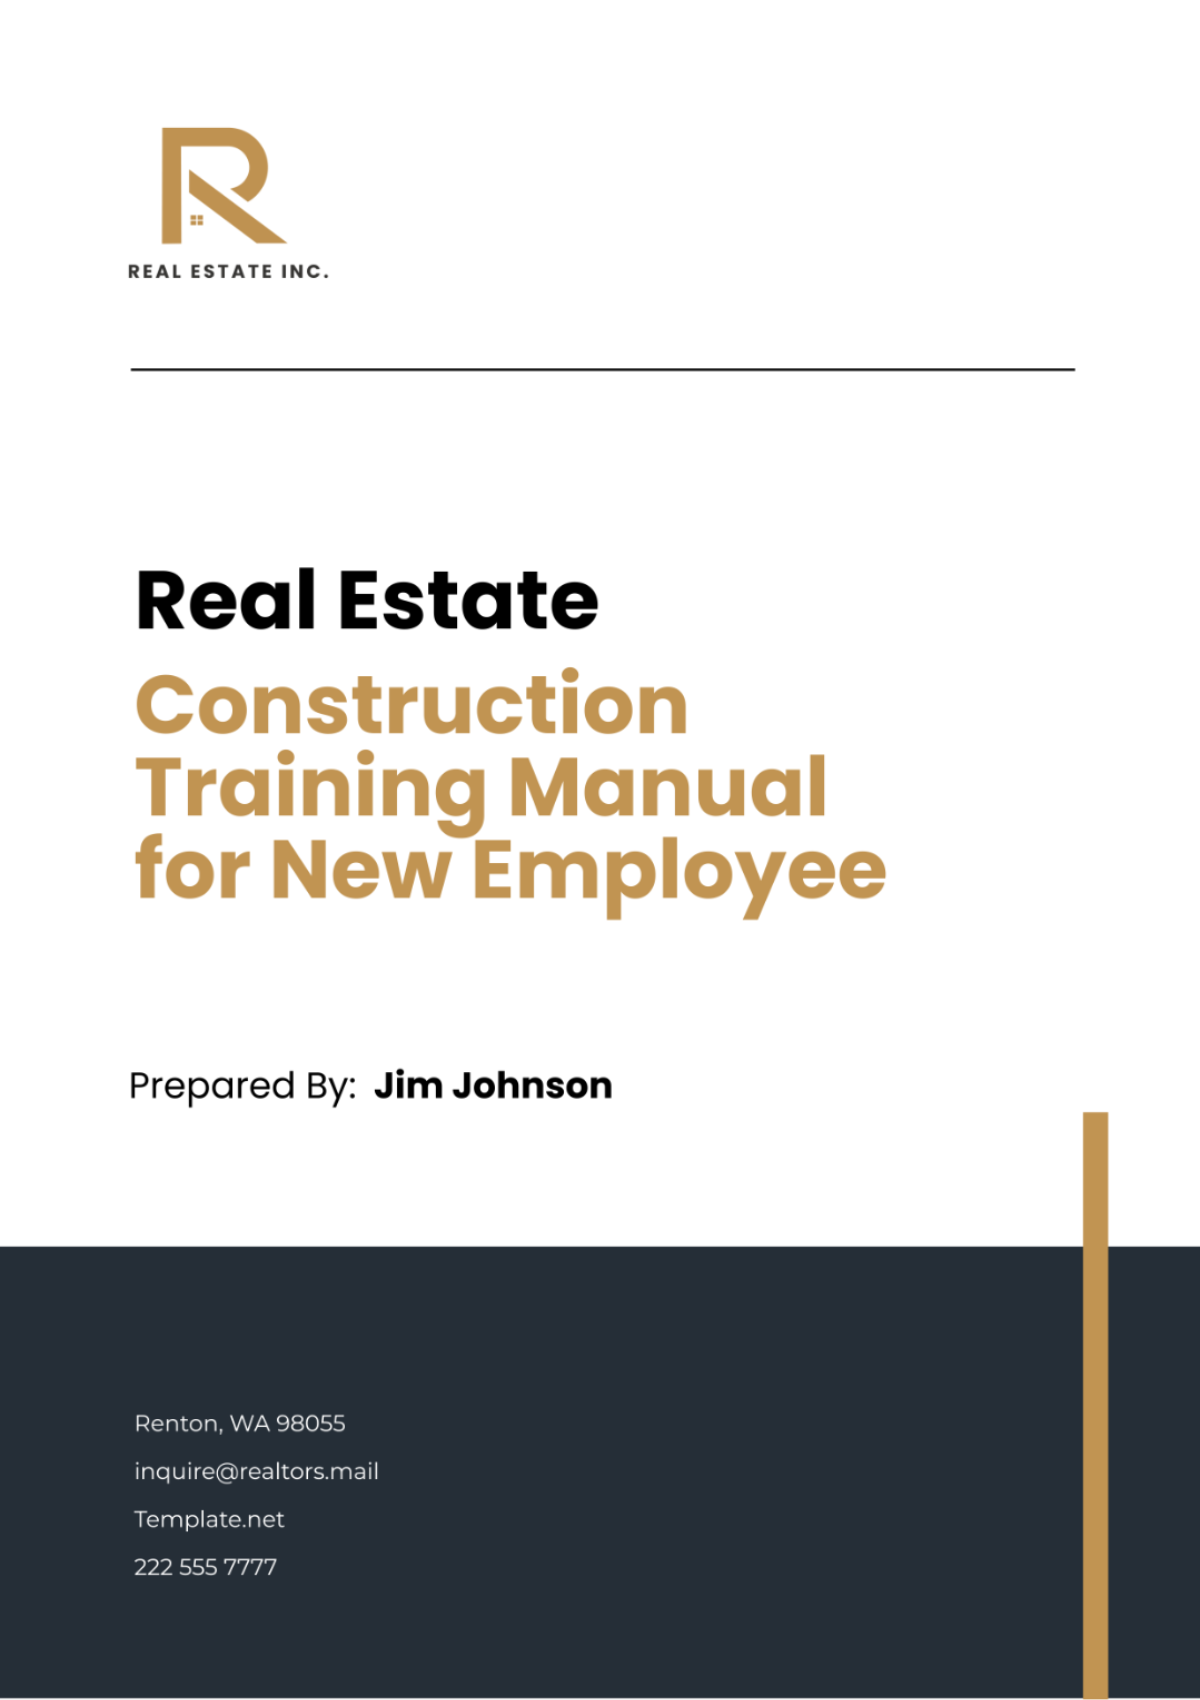 Free Real Estate Construction Training Manual for New Employees Template